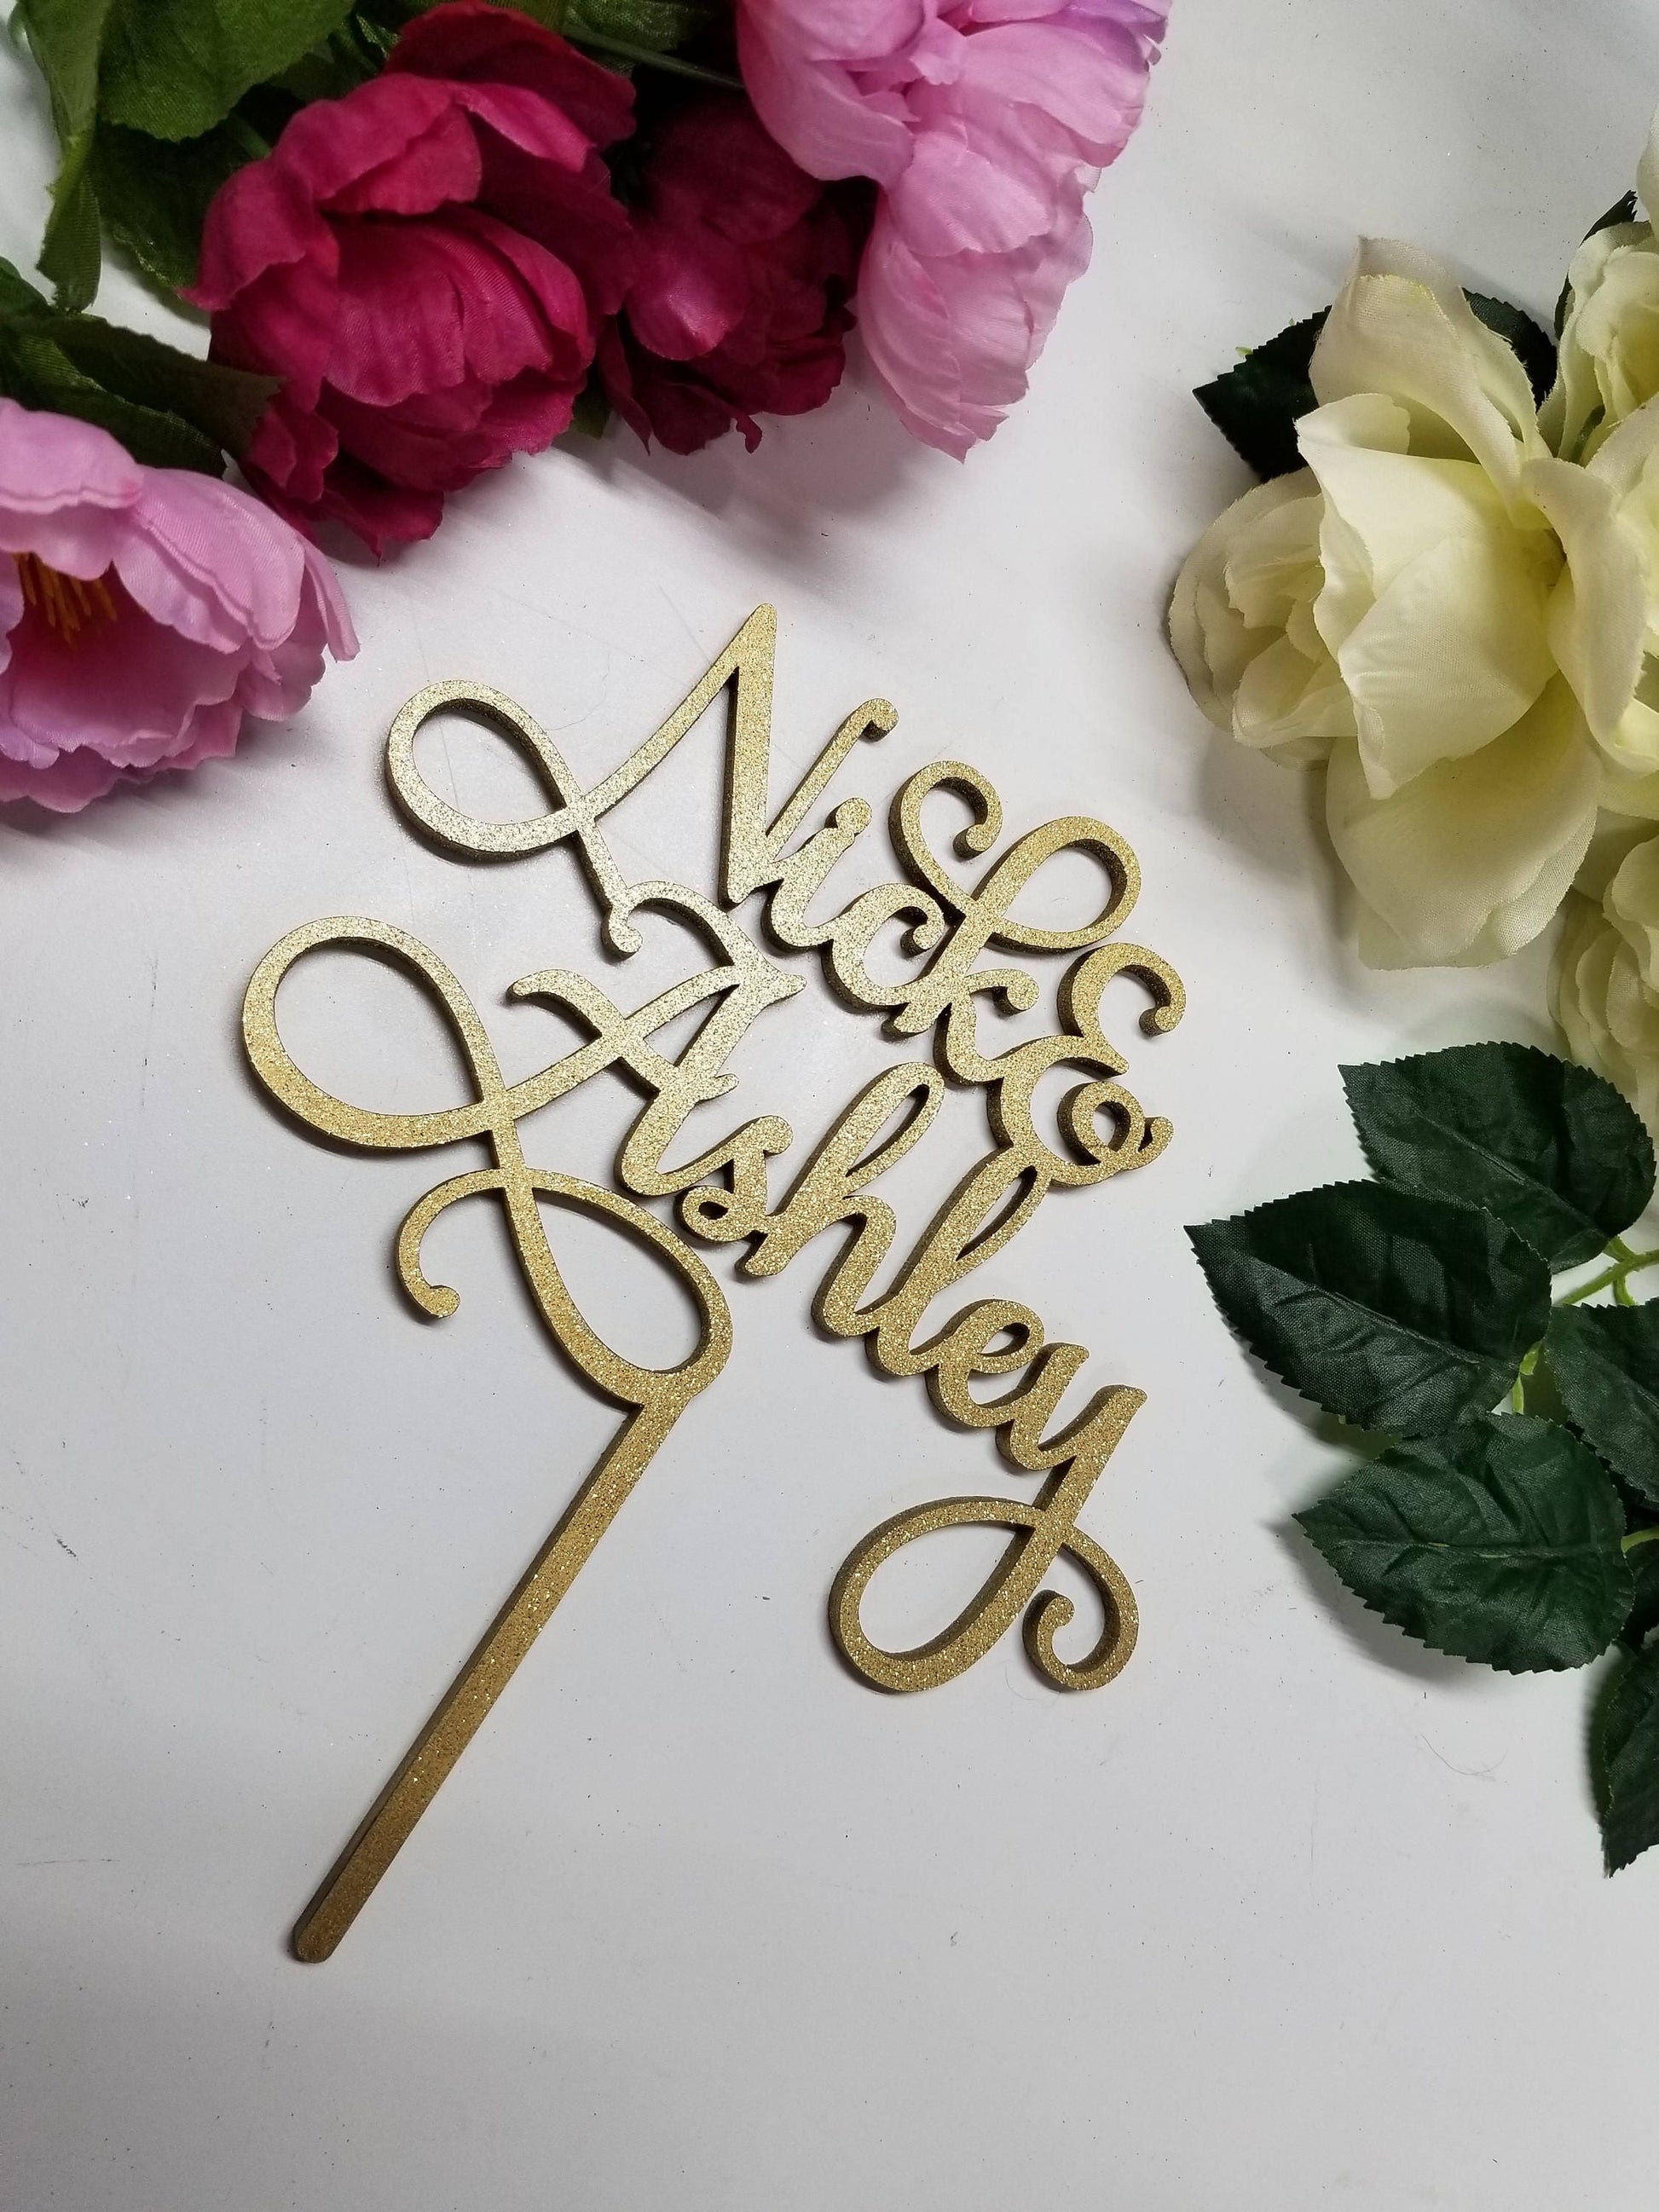 Wedding Table Numbers & Cake Topper. Matching Script Wedding Cake Topper and Table Numbers. Wood Wedding Table Numbers.d Custom Cake topper